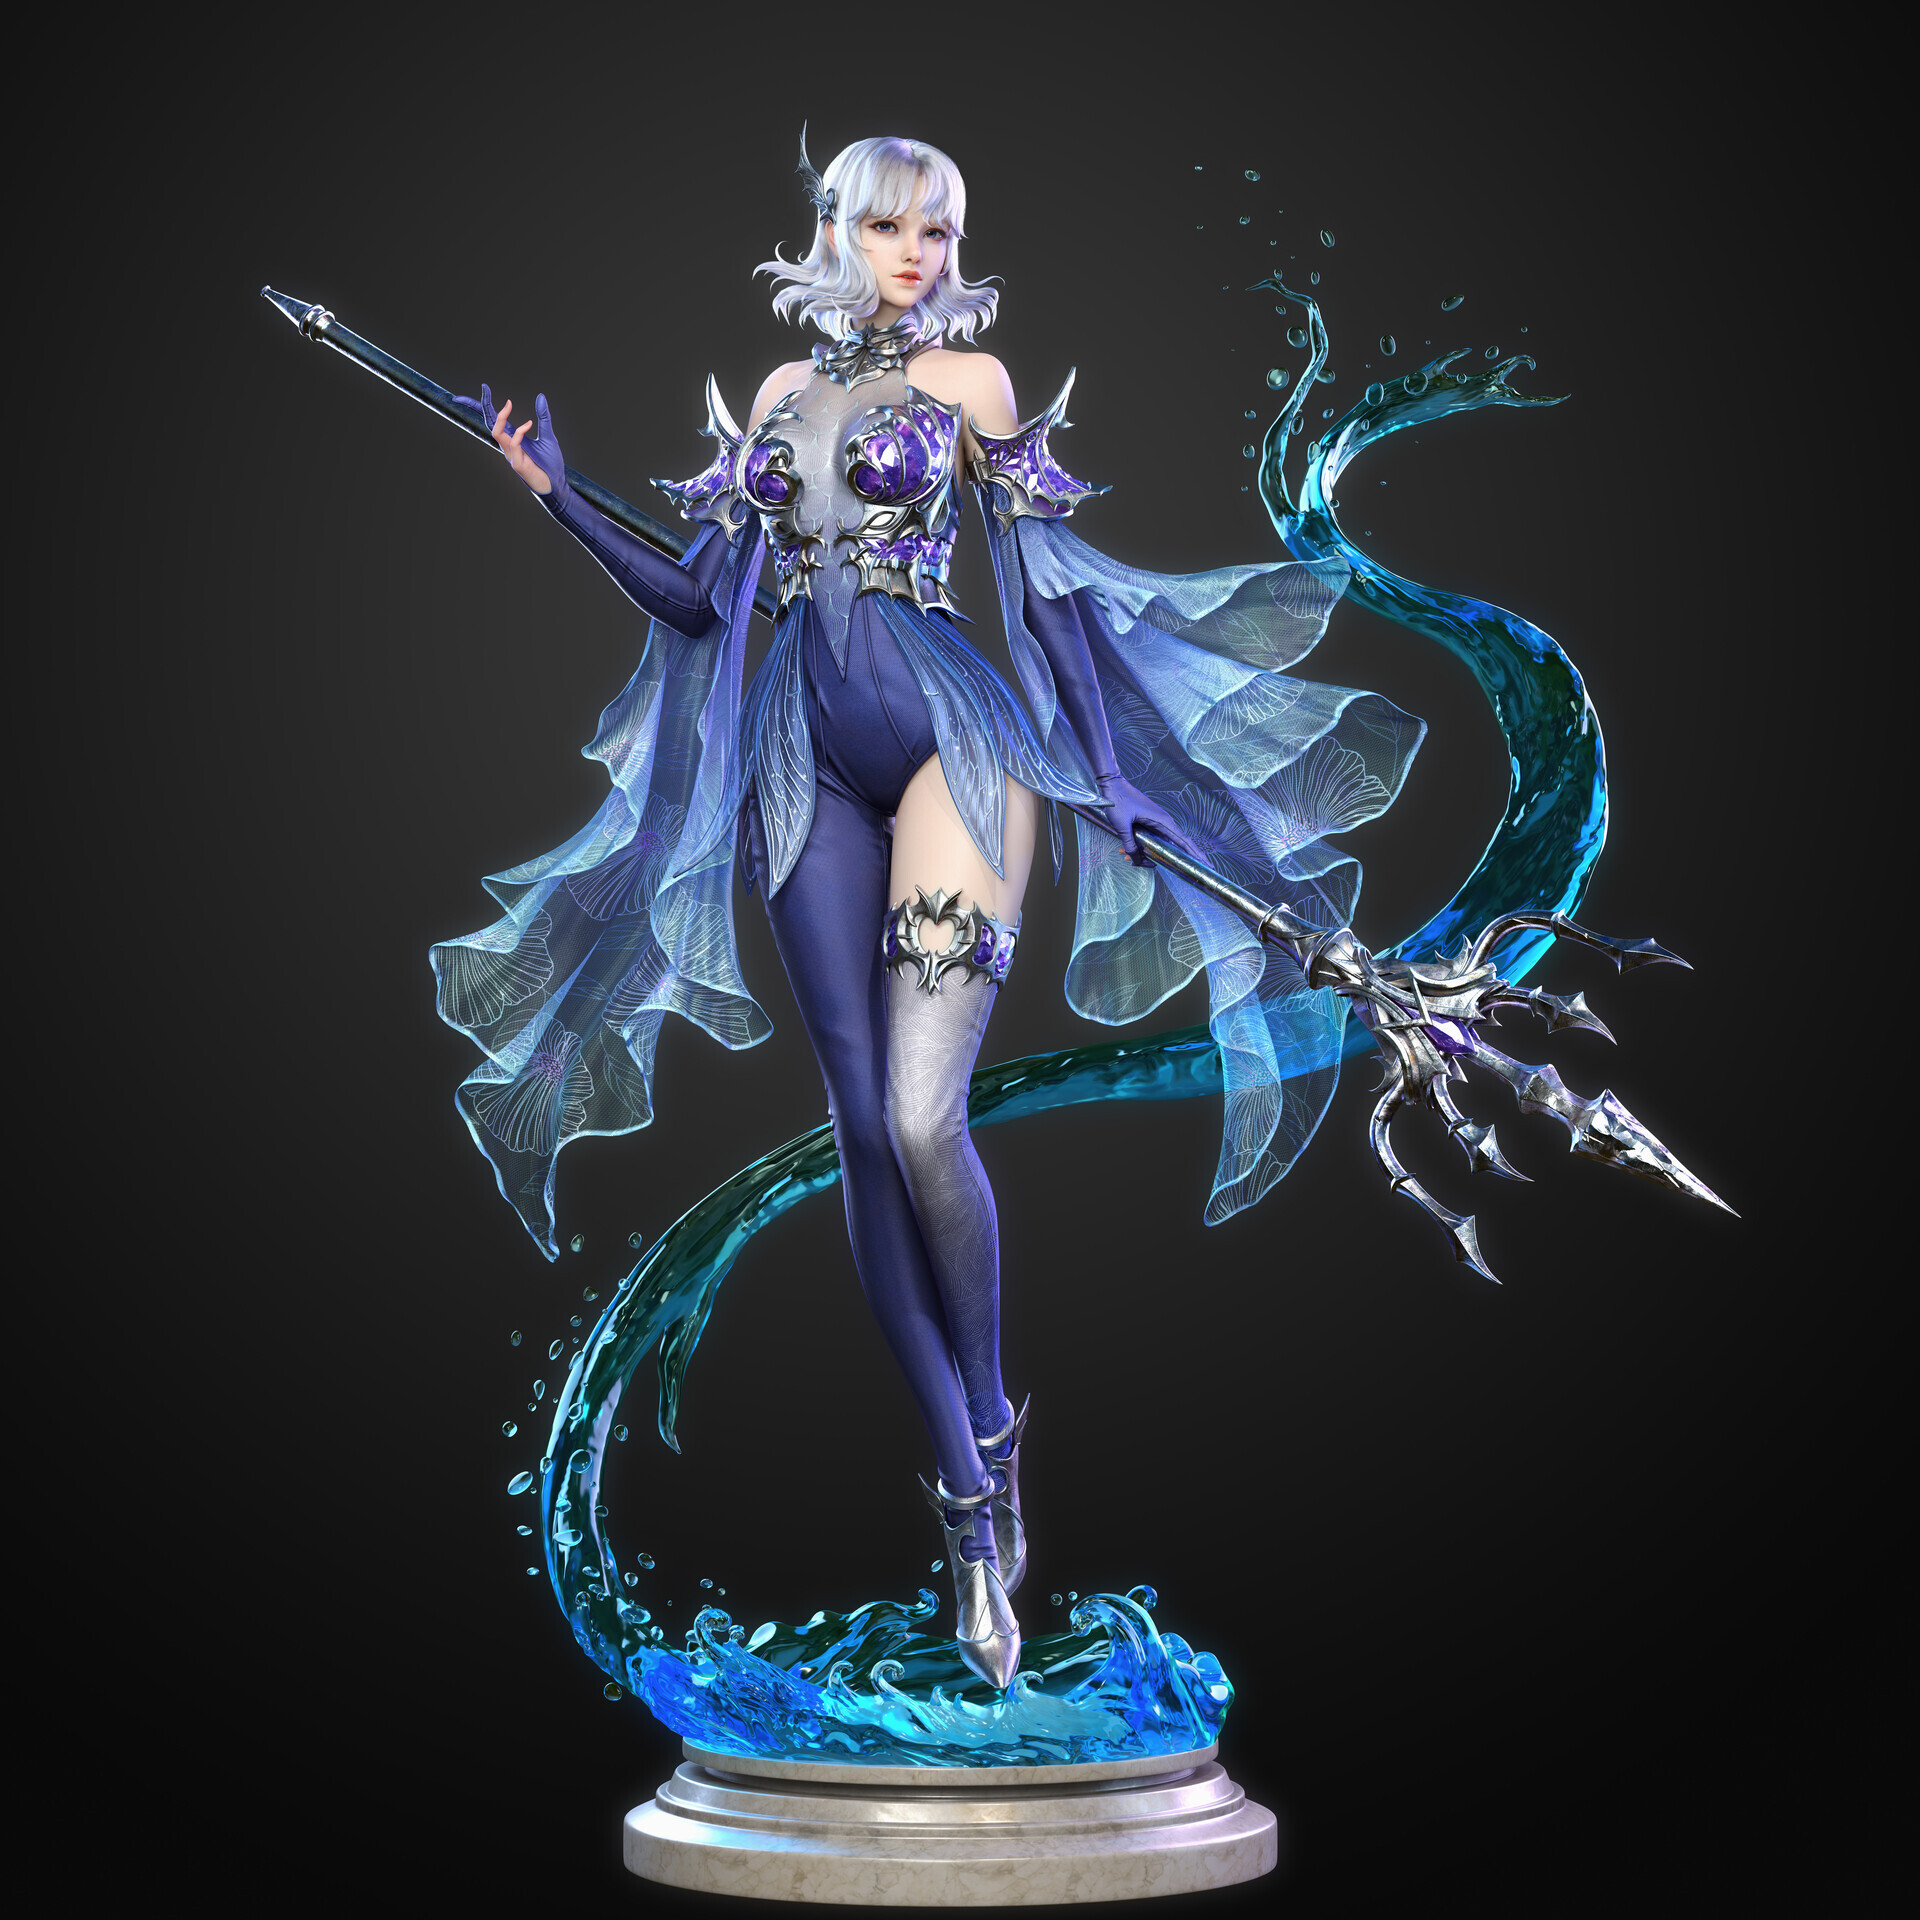 Lucas Liao CGi Women Silver Hair Dress Blue Clothing Water Trident Weapon Fantasy Art Simple Backgro 1920x1920